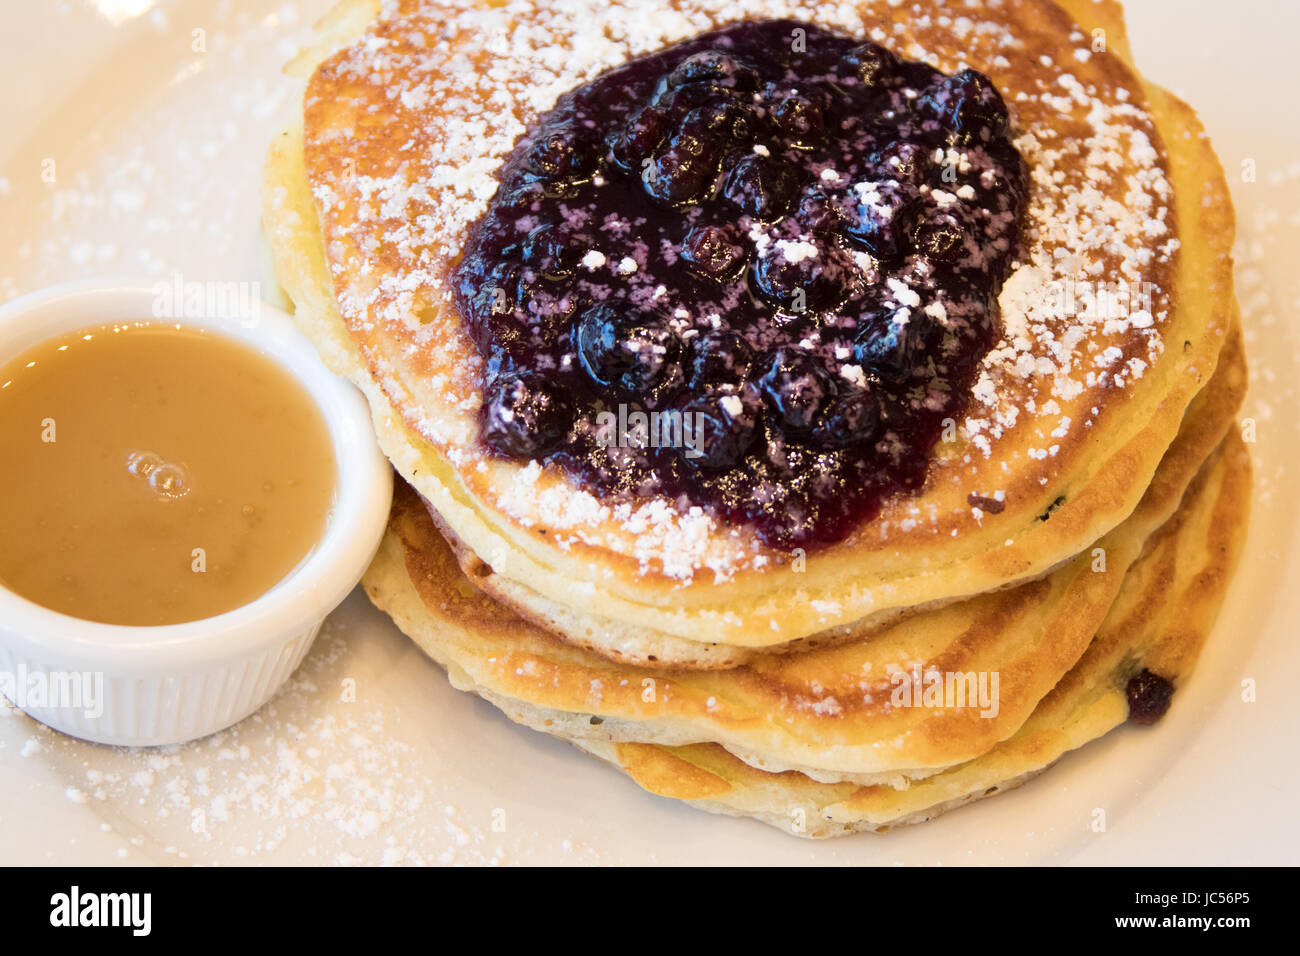 Blueberry pancakes with warm maple butter, Clinton Street Baking Company restaurant, Lower East Side, New York City Stock Photo